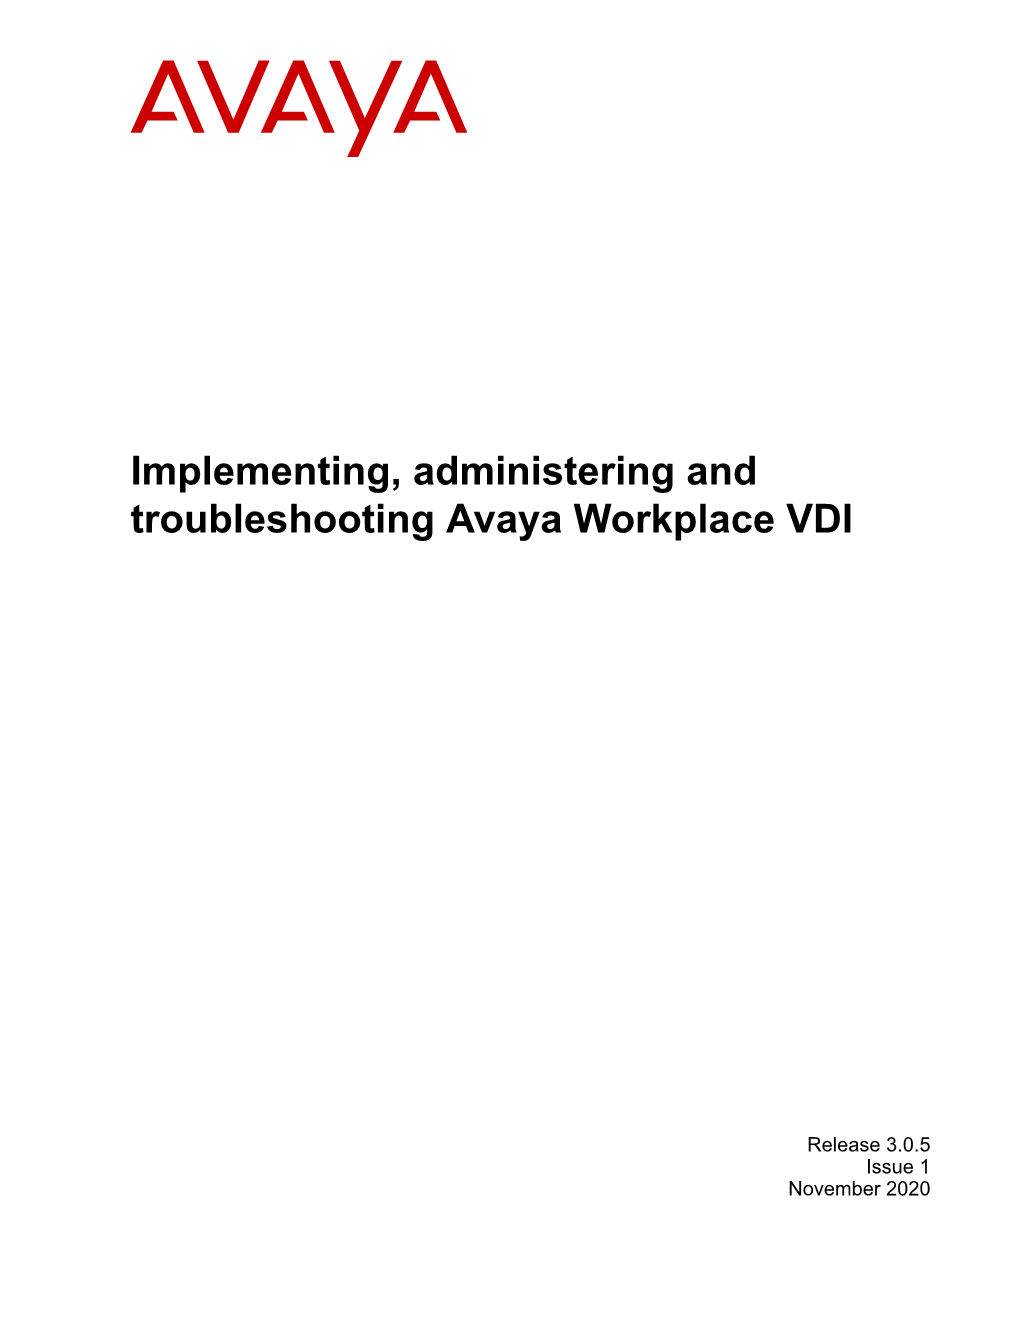 Implementing, Administering and Troubleshooting Avaya Workplace VDI